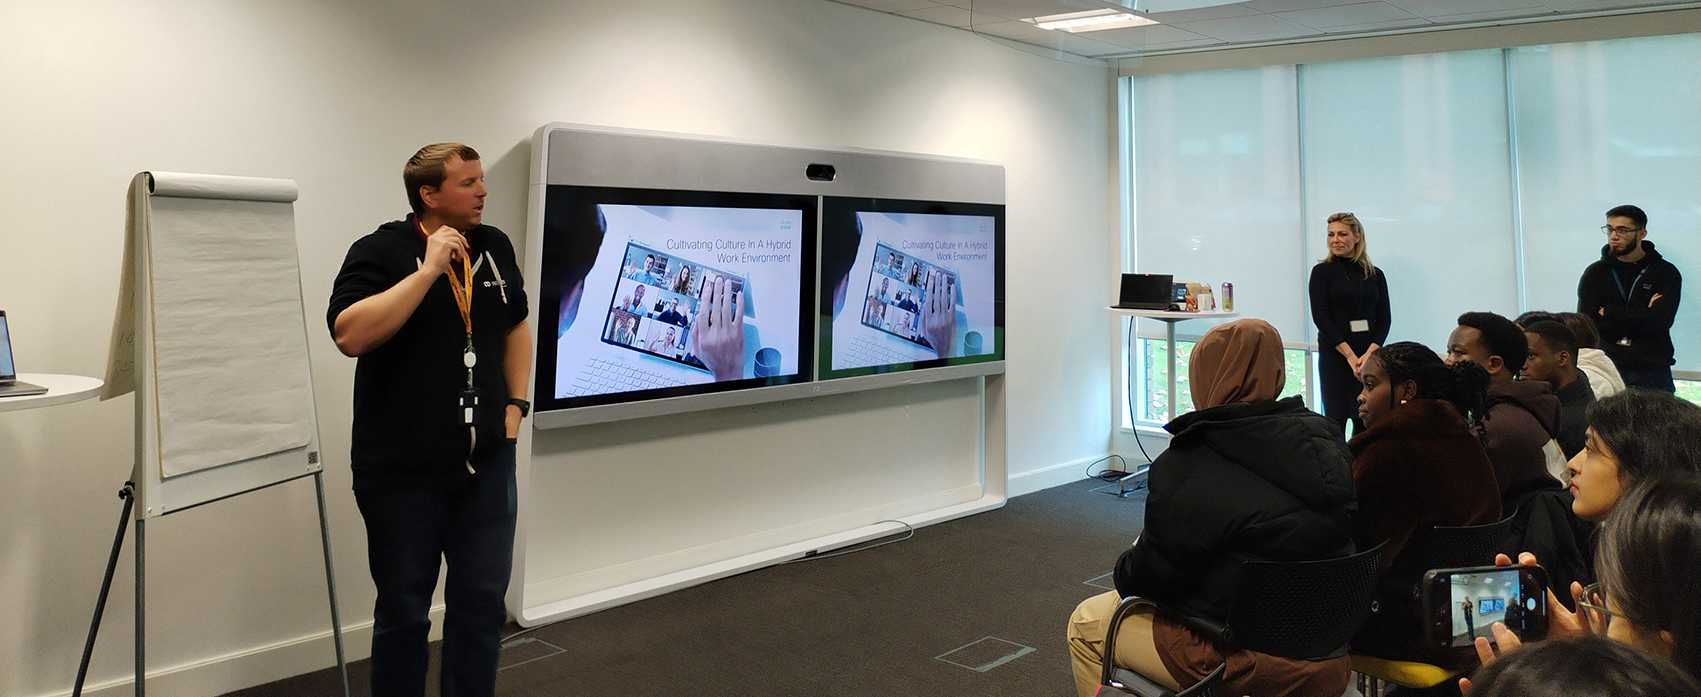 Students sit behind desks while a Cisco employee gives a presentation at the front of the room on two big digital screens.